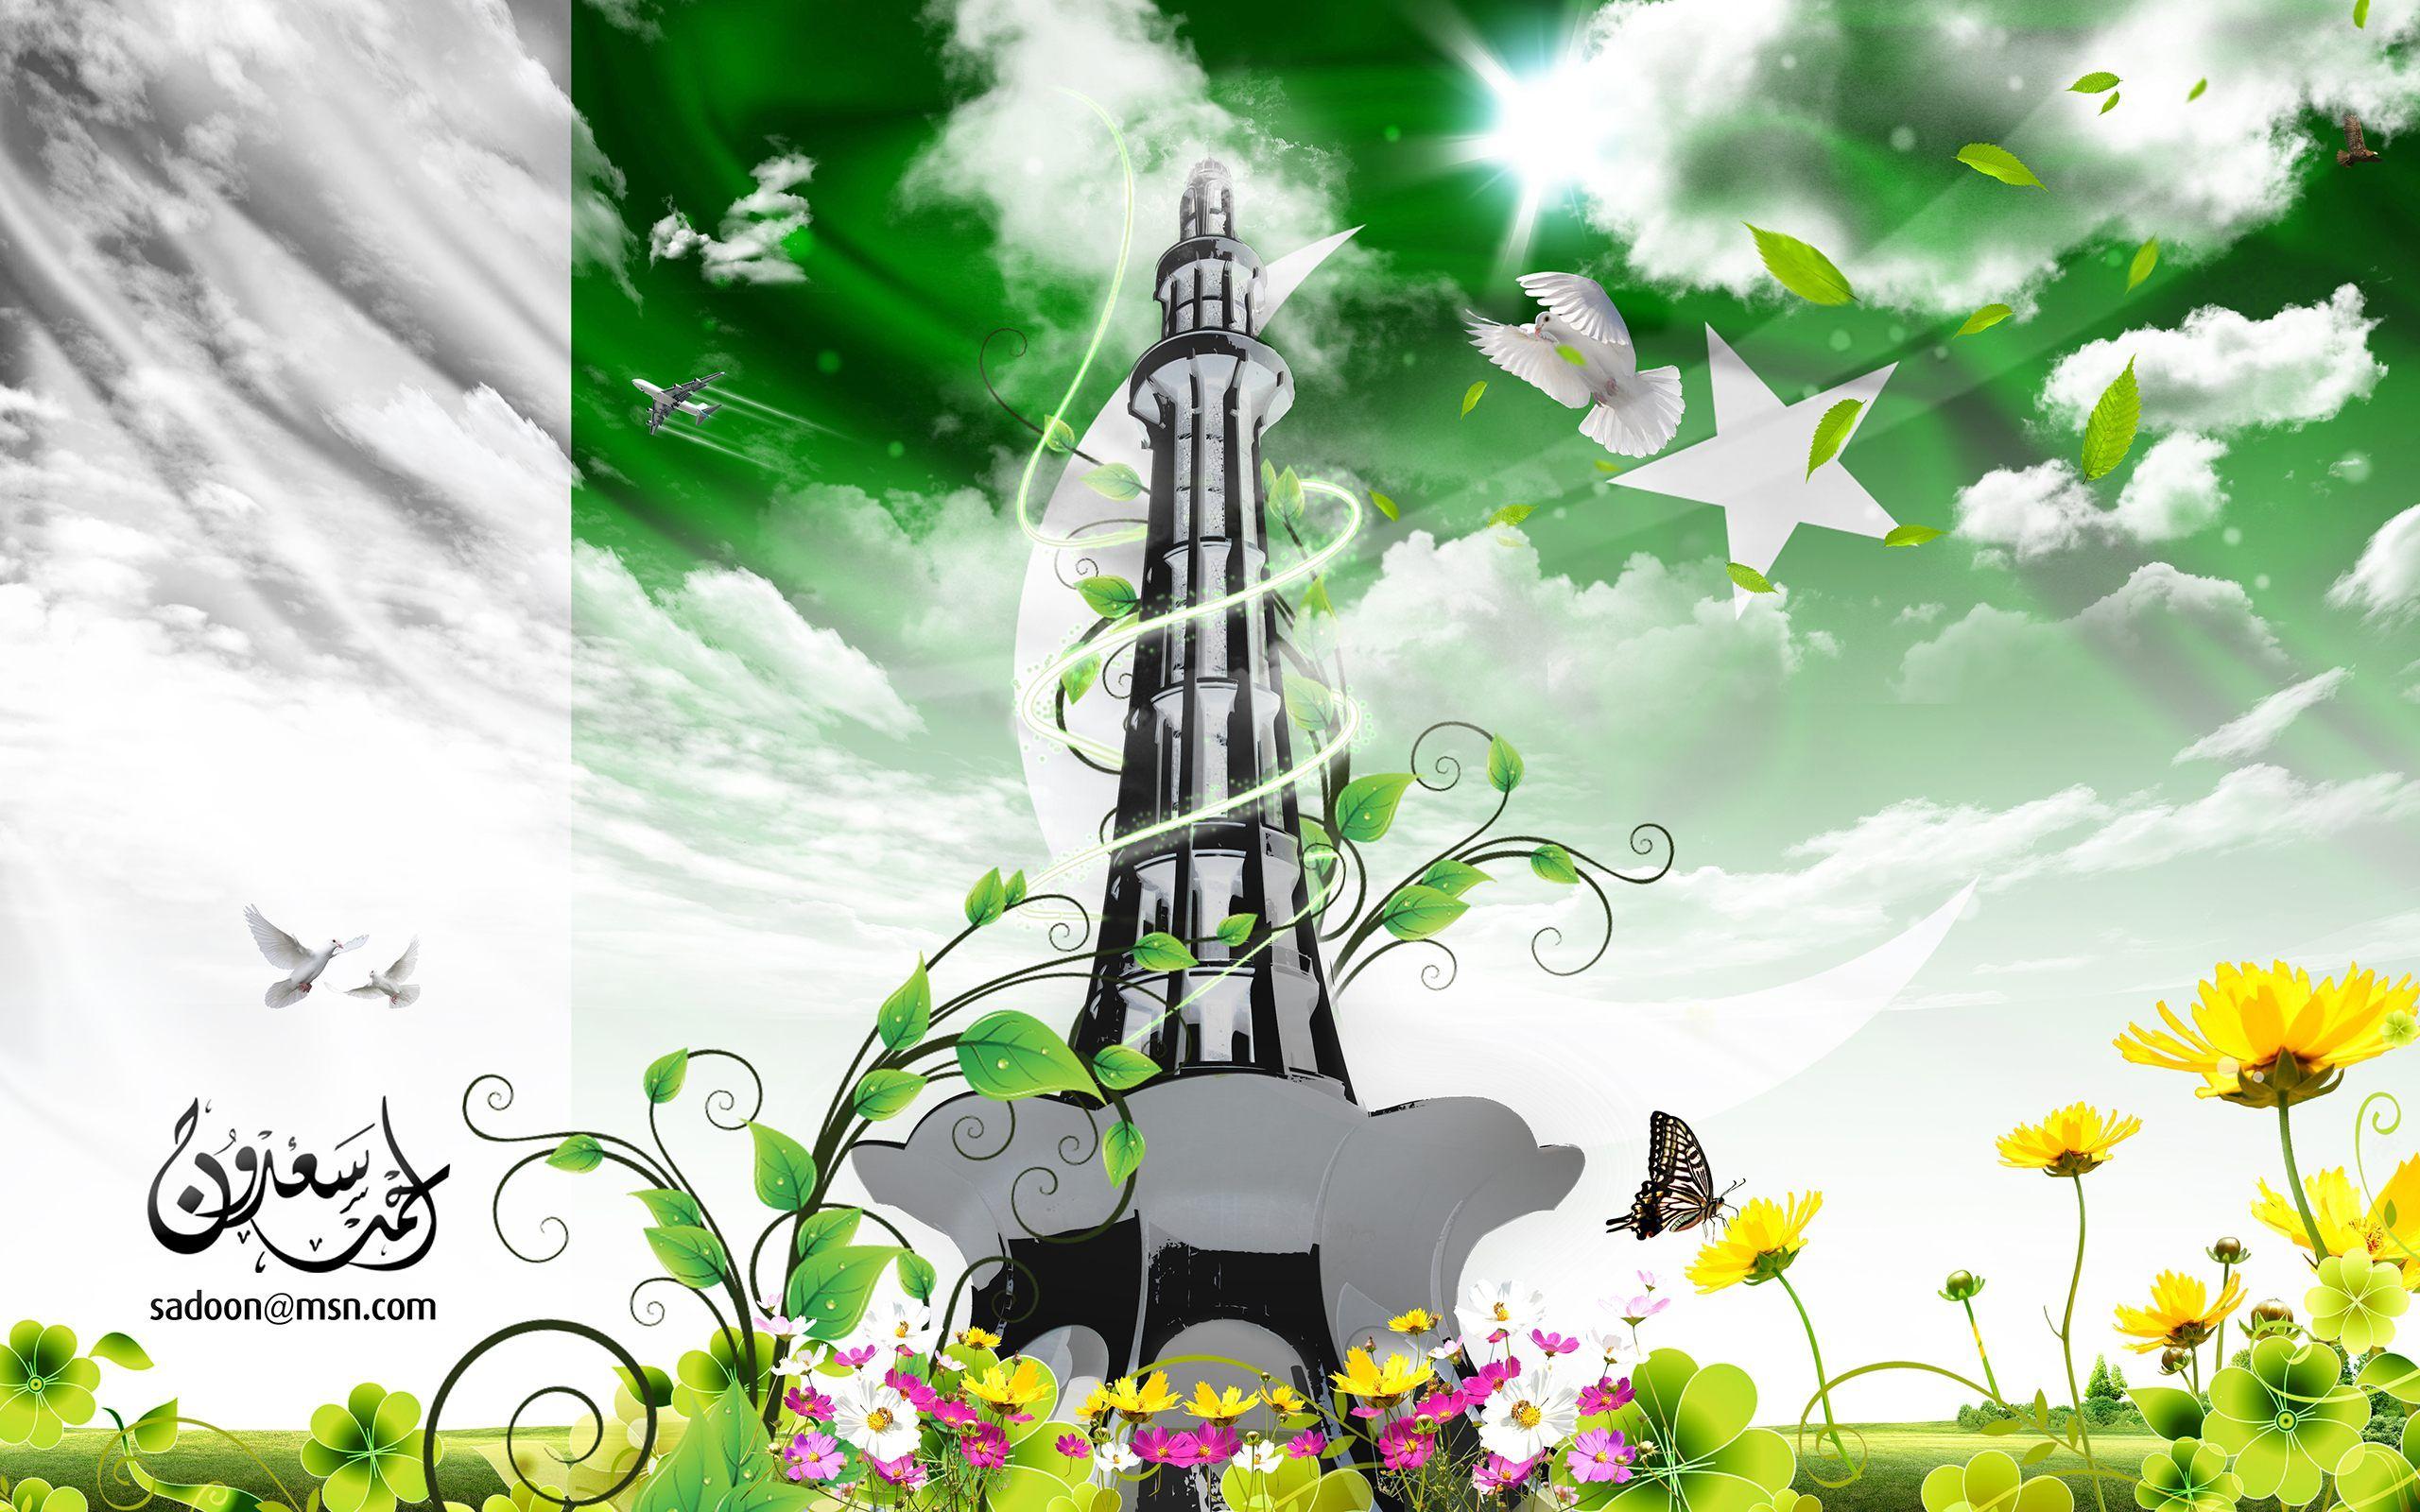 Background For Pakistan Flag Android Apps On Play HD Green